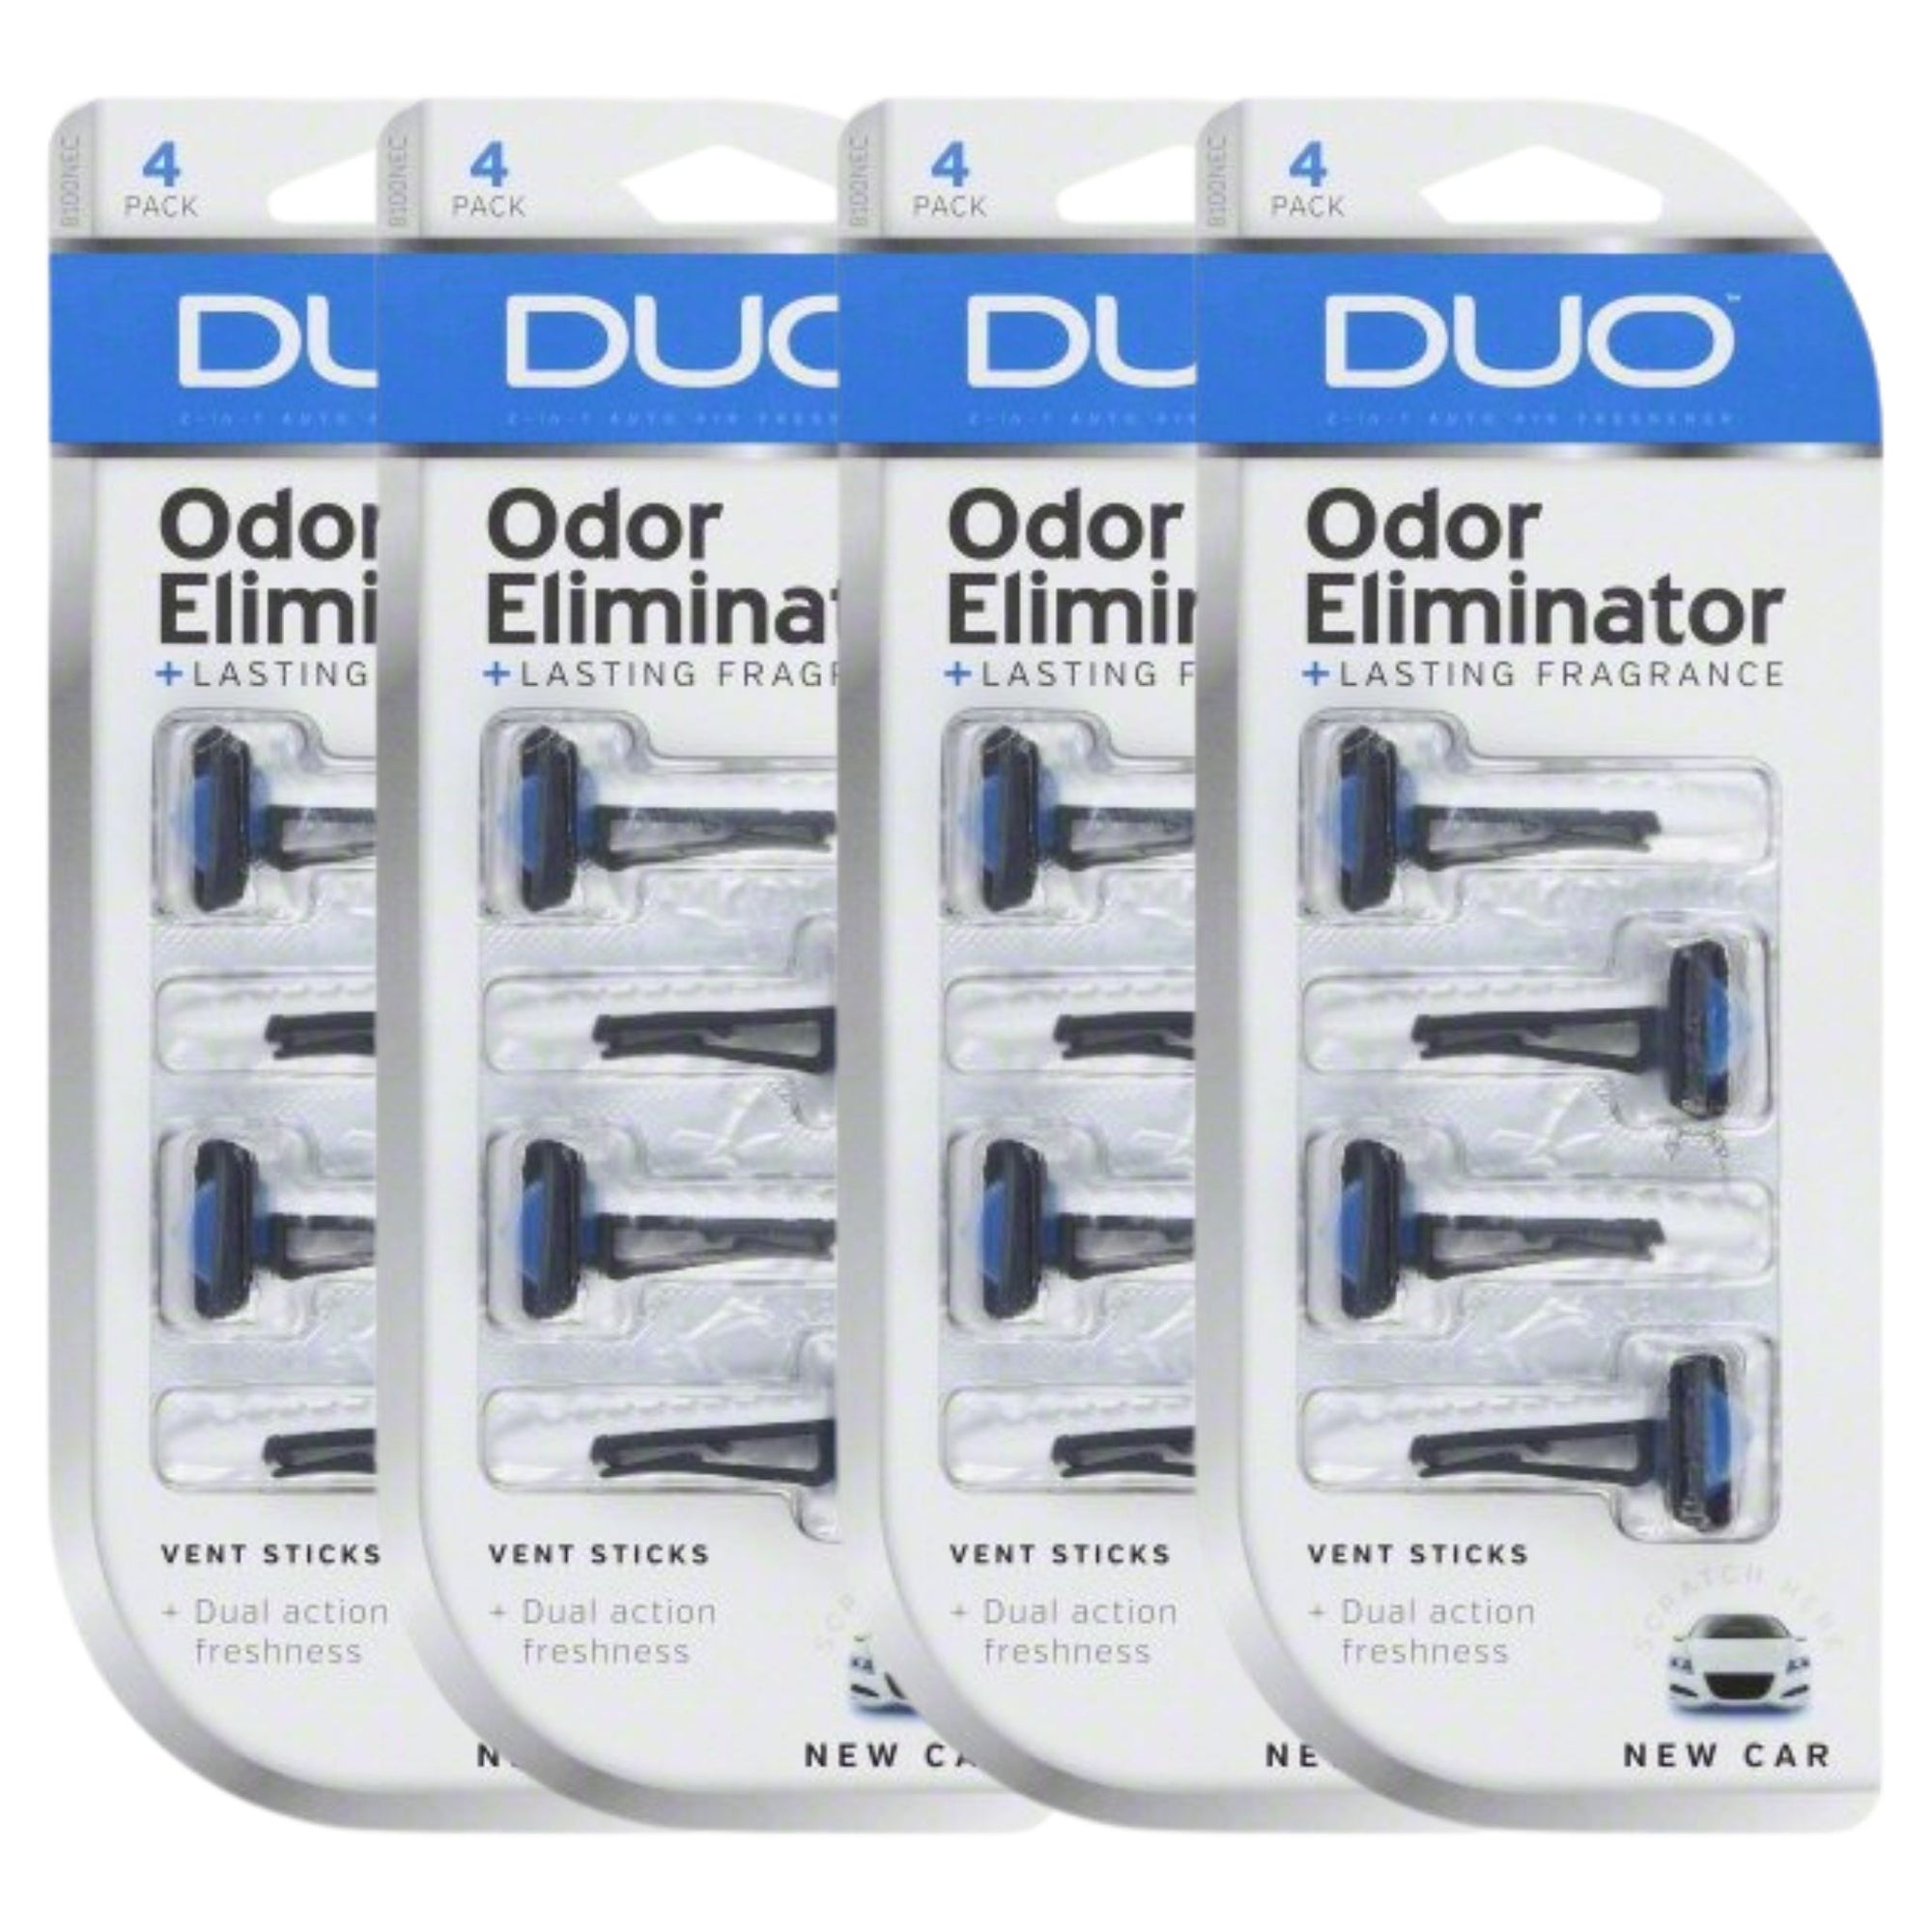 DUO TM BY HOPKINS 8100NECC VENT STICK AIR FRESHENER | NEW CAR (16 STICKS) - South East Clearance Centre